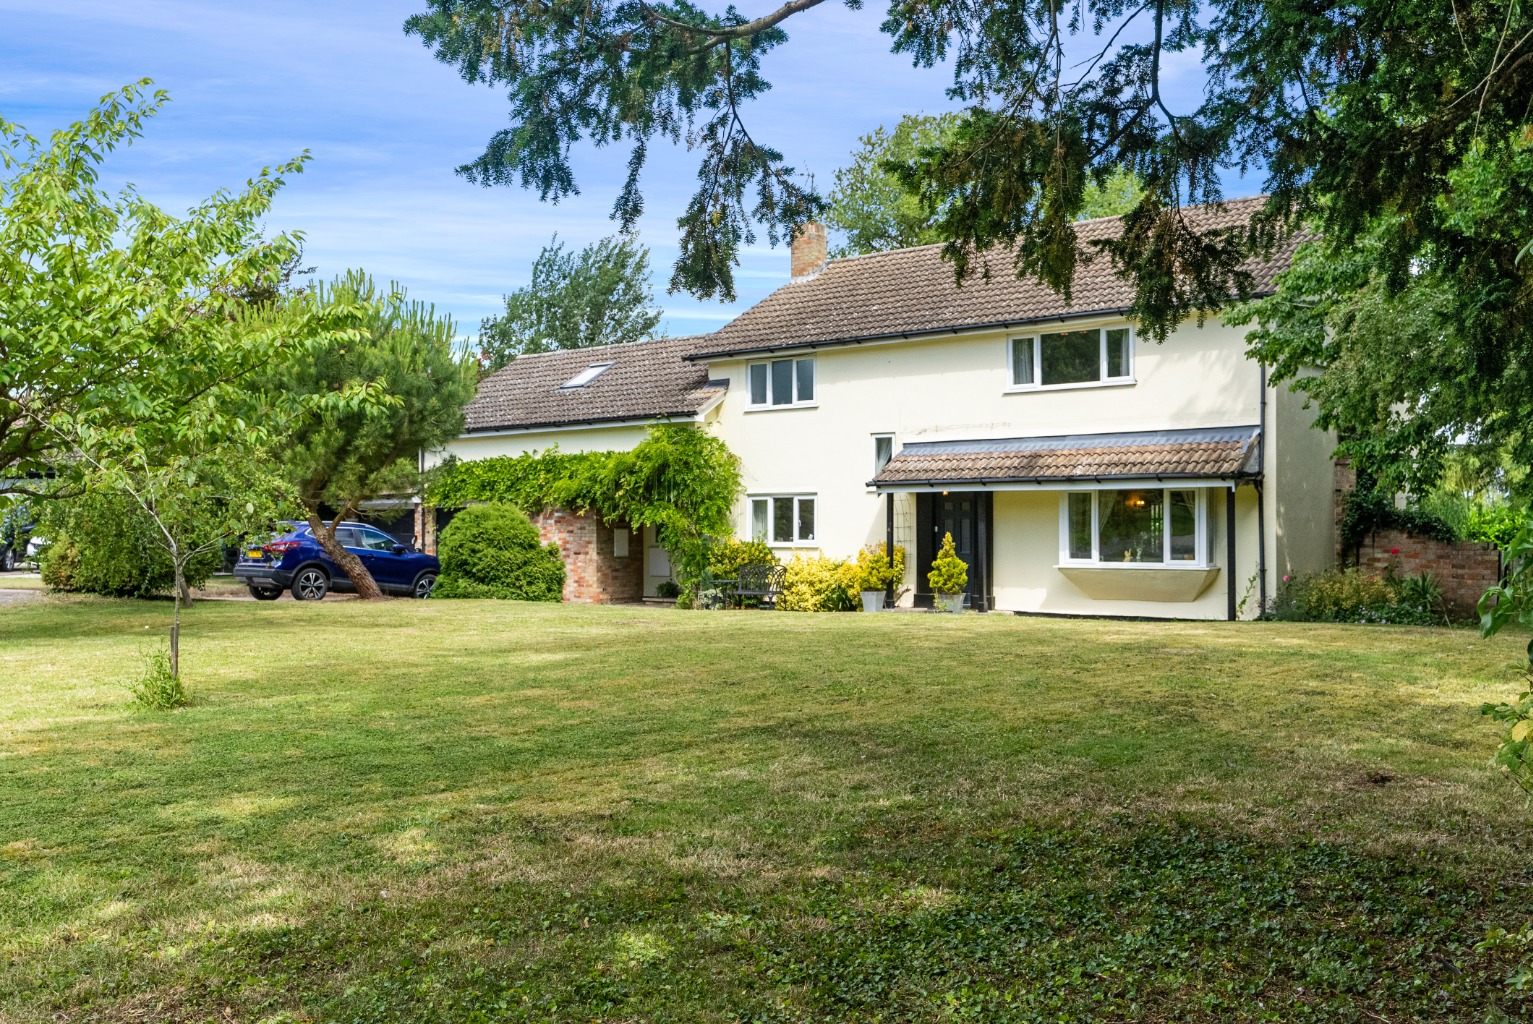 Coming to the market for the first time in twenty five years, this is a fantastic opportunity to acquire this extremely spacious, six bedroom, detached executive home in an idyllic spot next to the local church within the pretty Cambridgeshire village of Graveley.